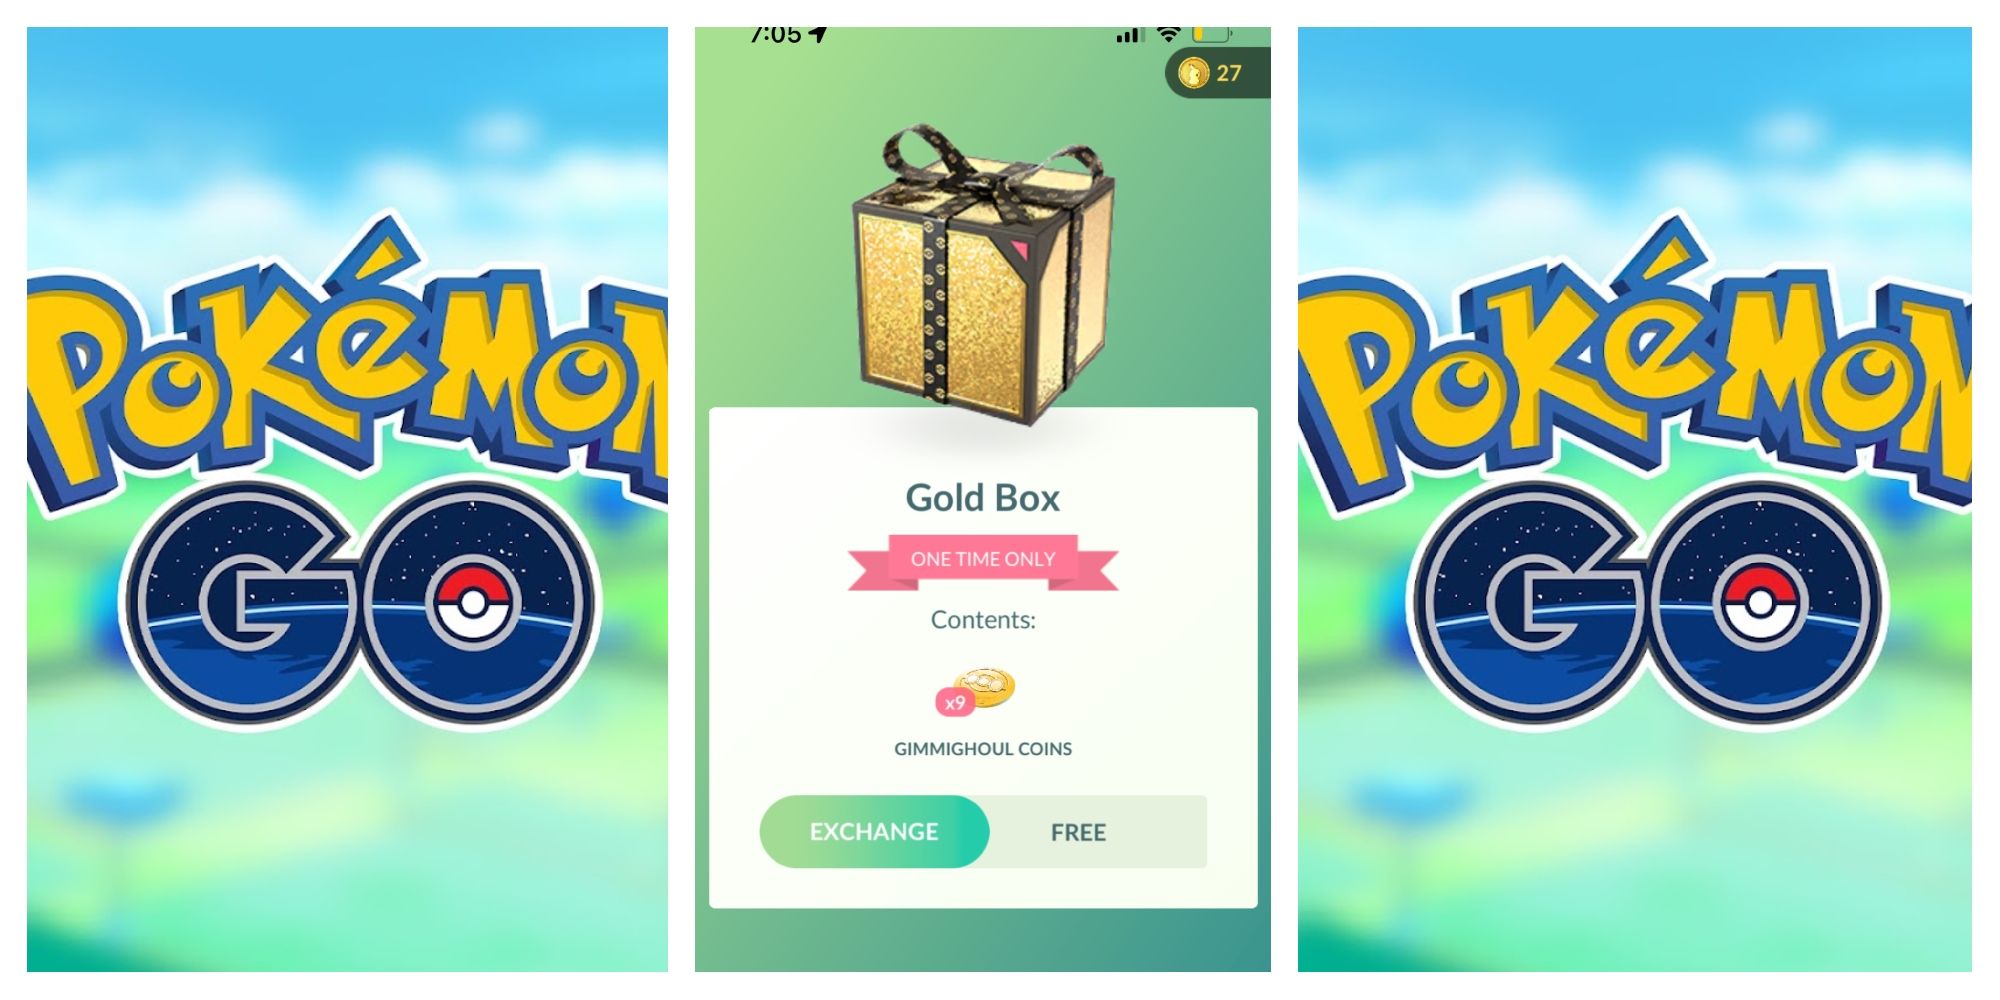 gold box gimmighoul coins pokemon go